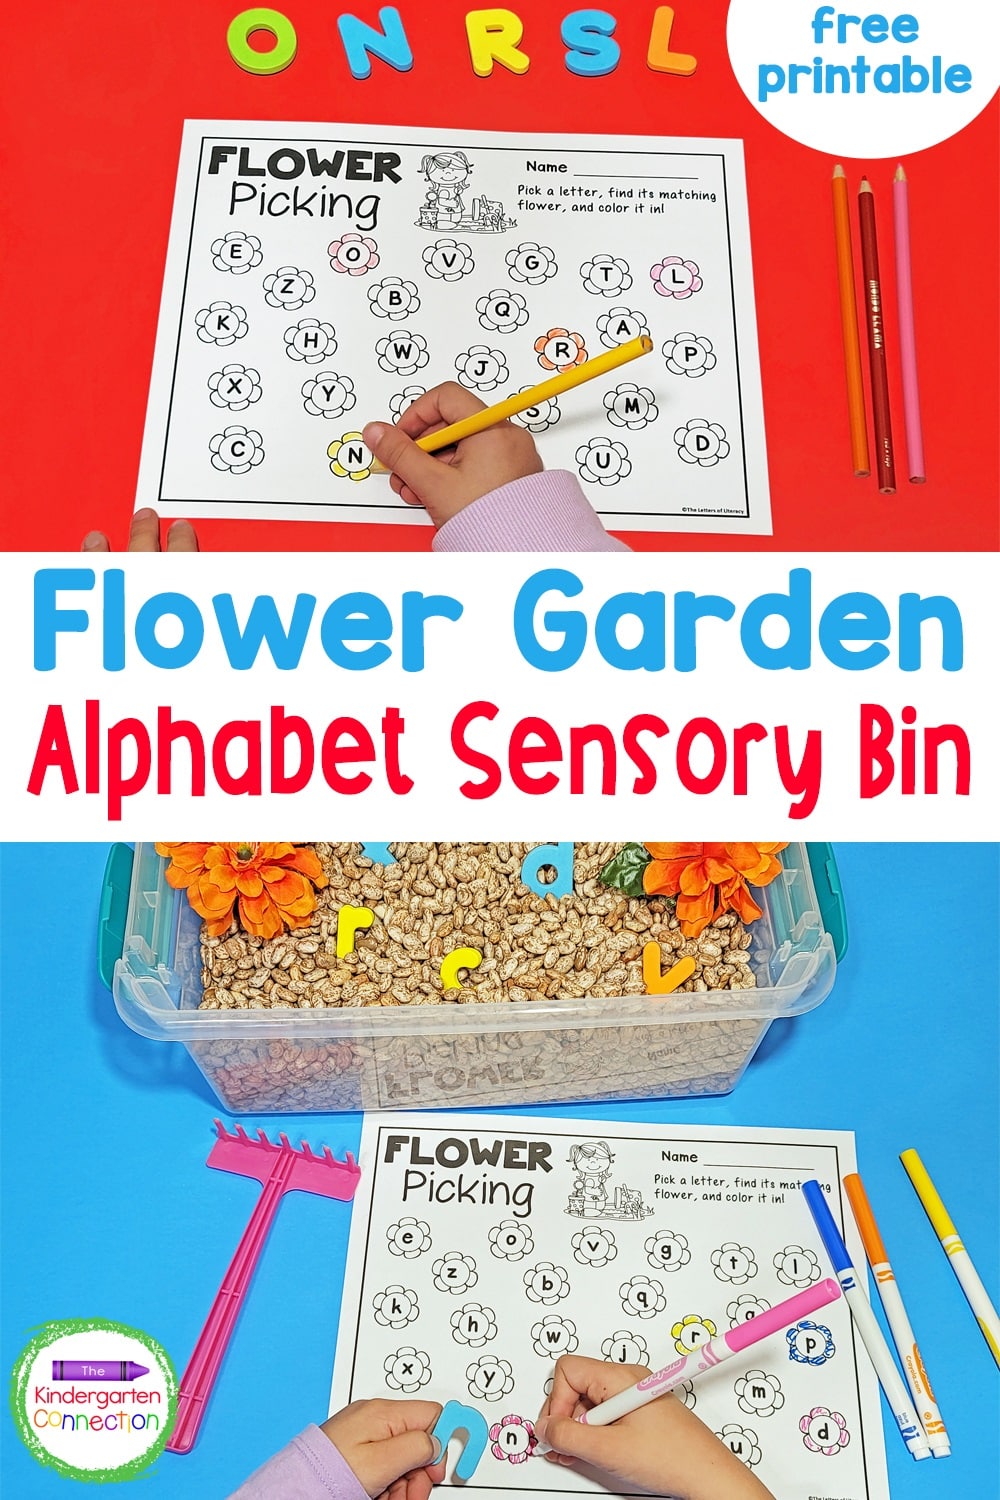 Practice the alphabet in a hands-on way in Pre-K and Kindergarten with this fun and free Alphabet Flower Garden Sensory Bin!